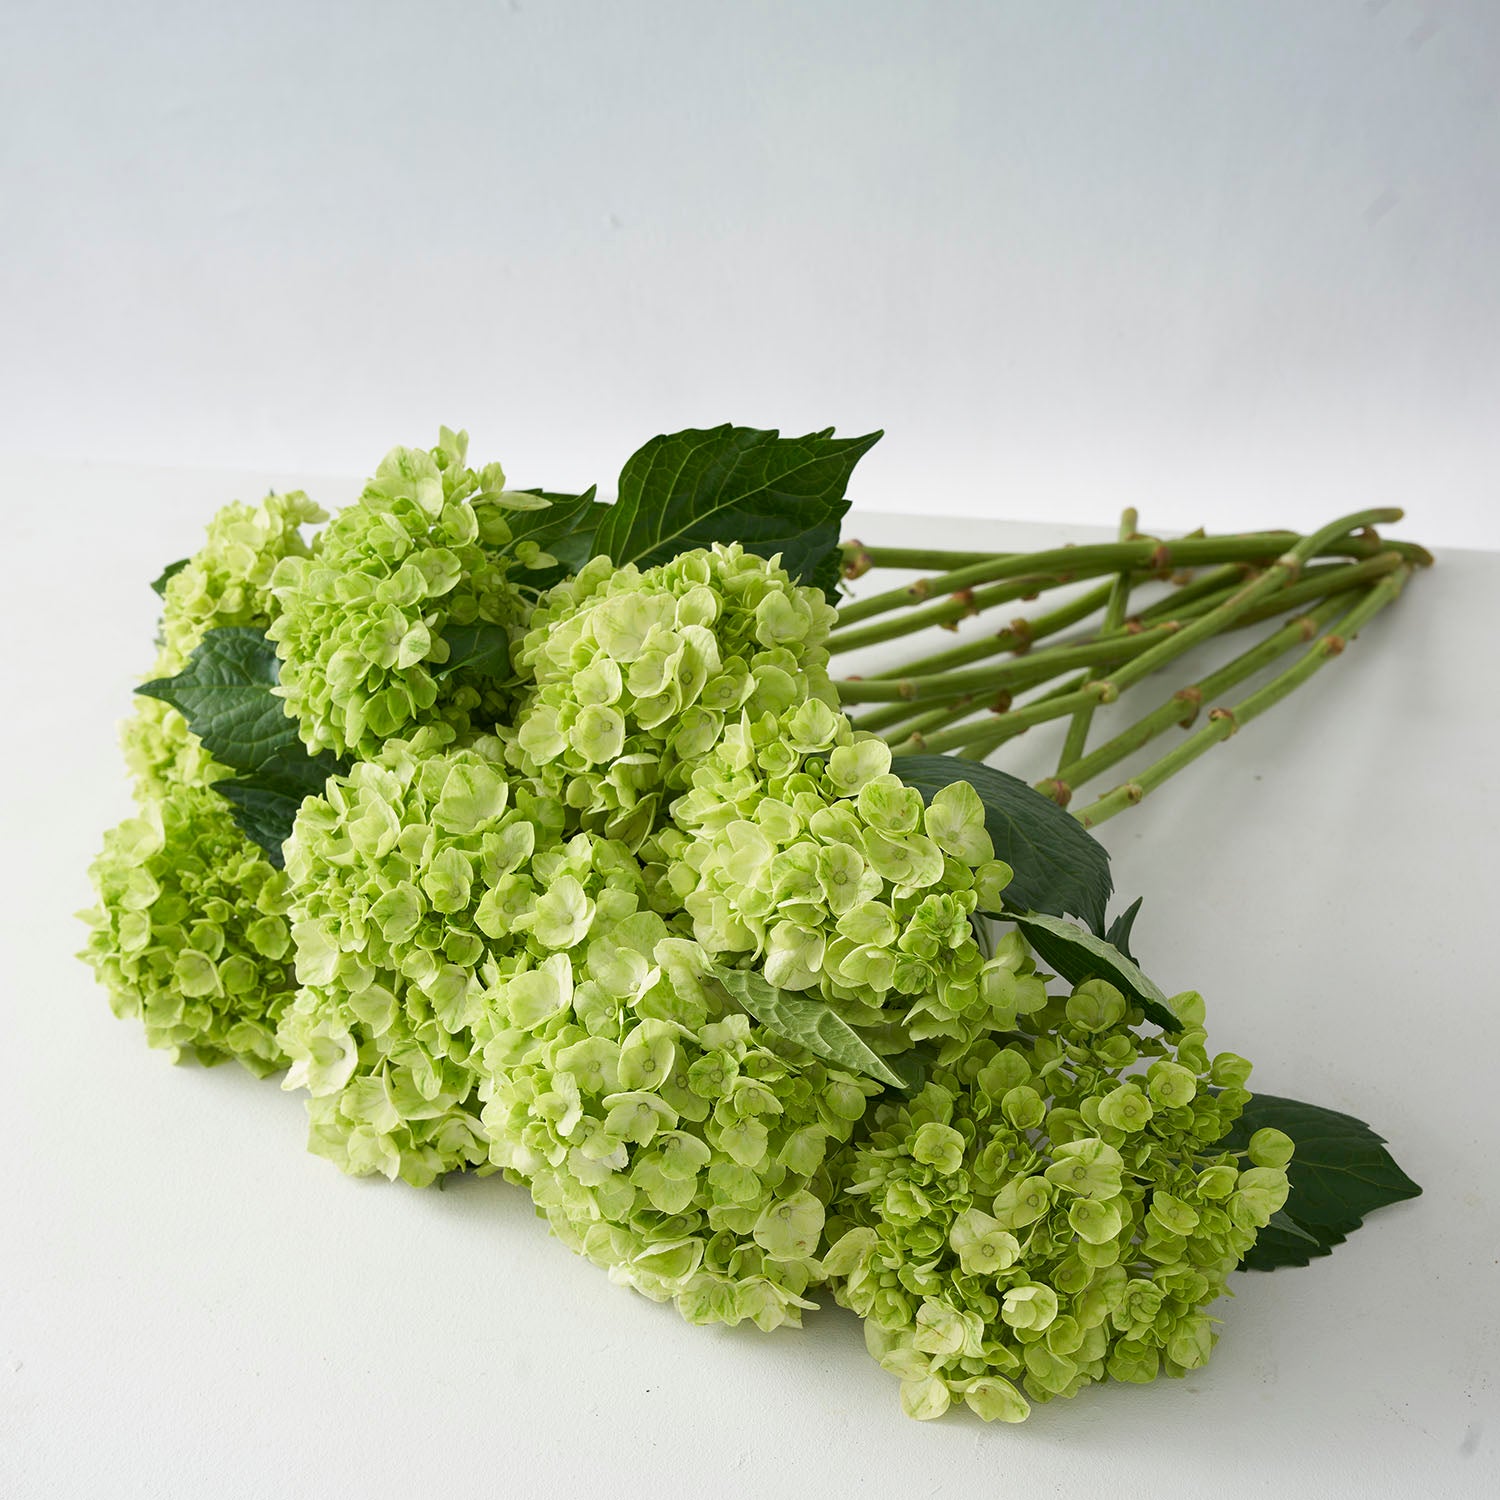 Large bouquet of bright green hydrange on white background.